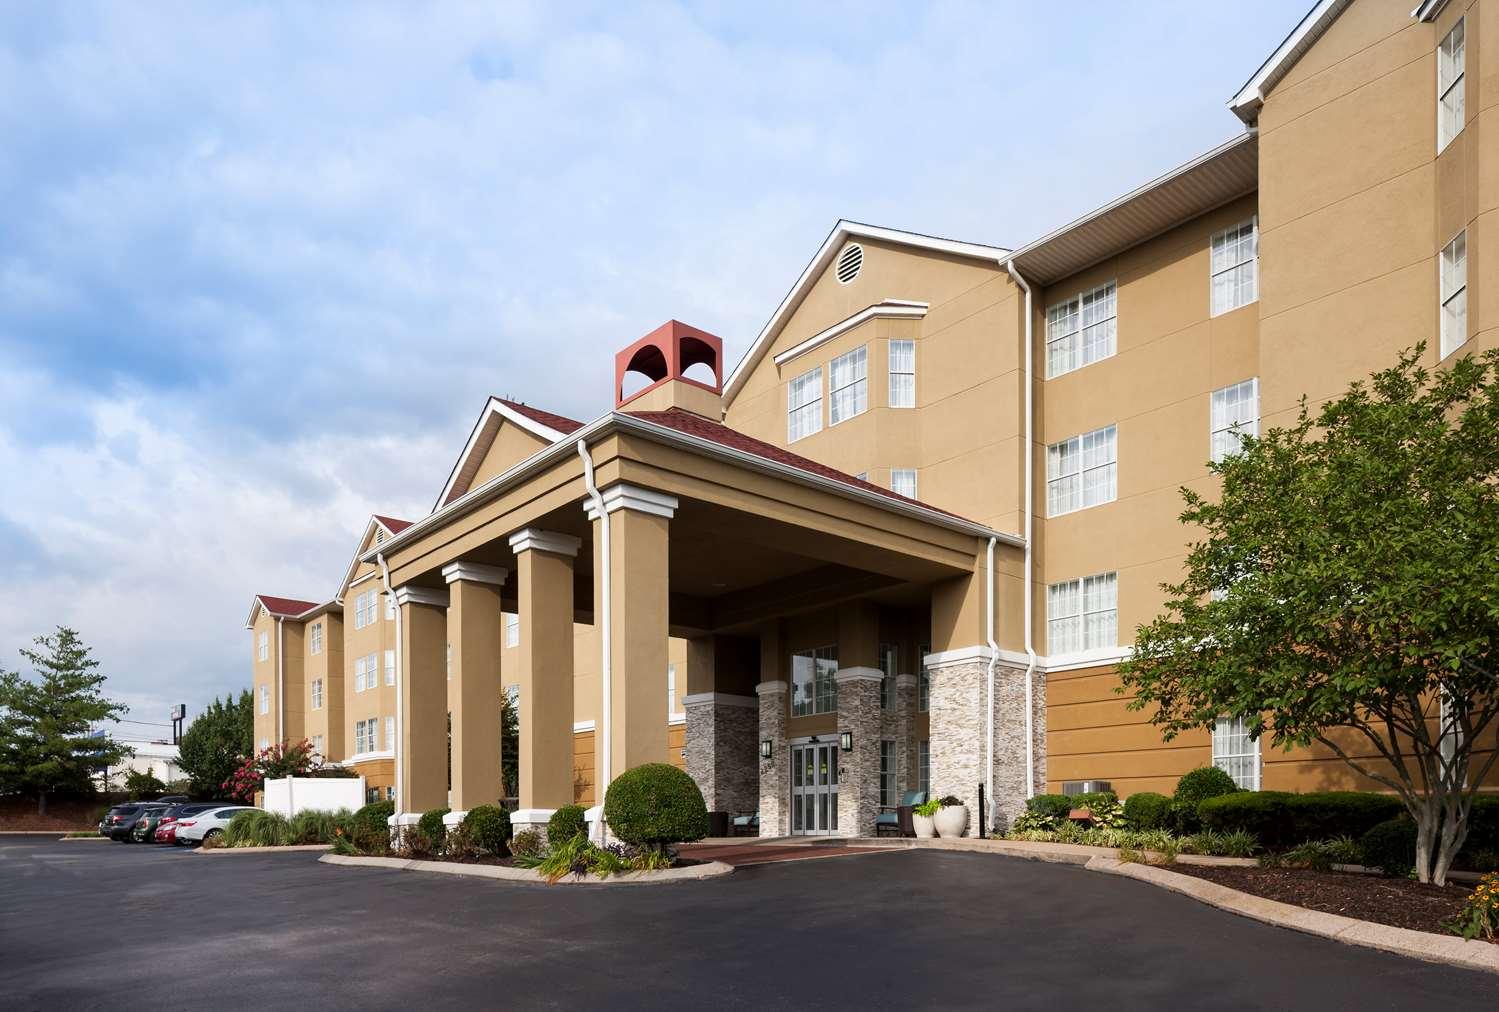 Homewood Suites by Hilton Chattanooga-Hamilton Place in Chattanooga, TN